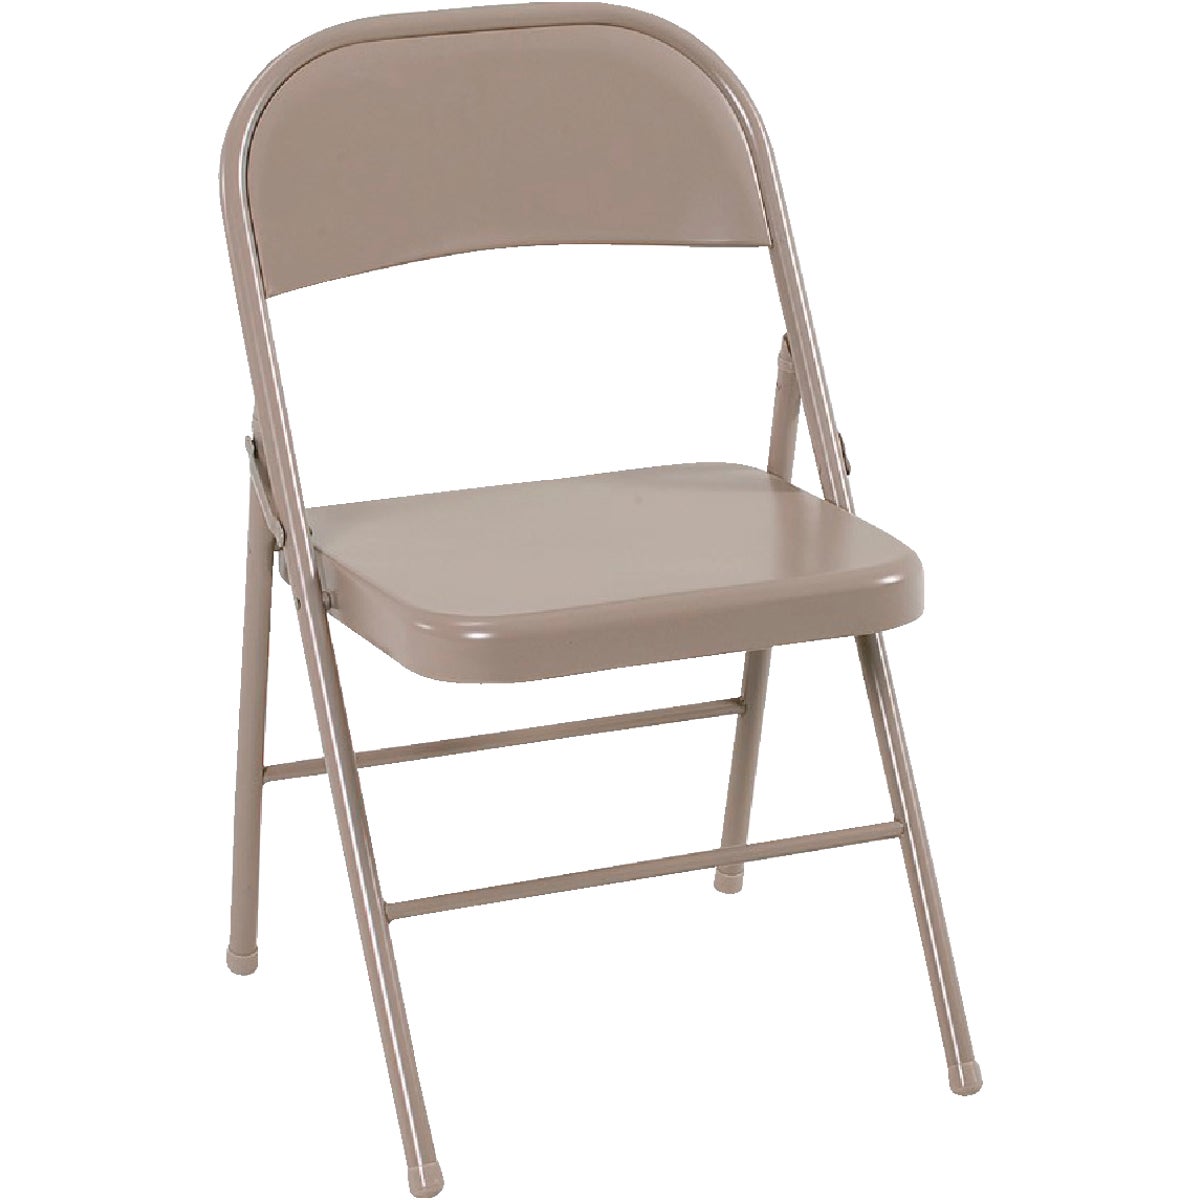 COSCO Tan All Steel Folding Chair (4-Count)